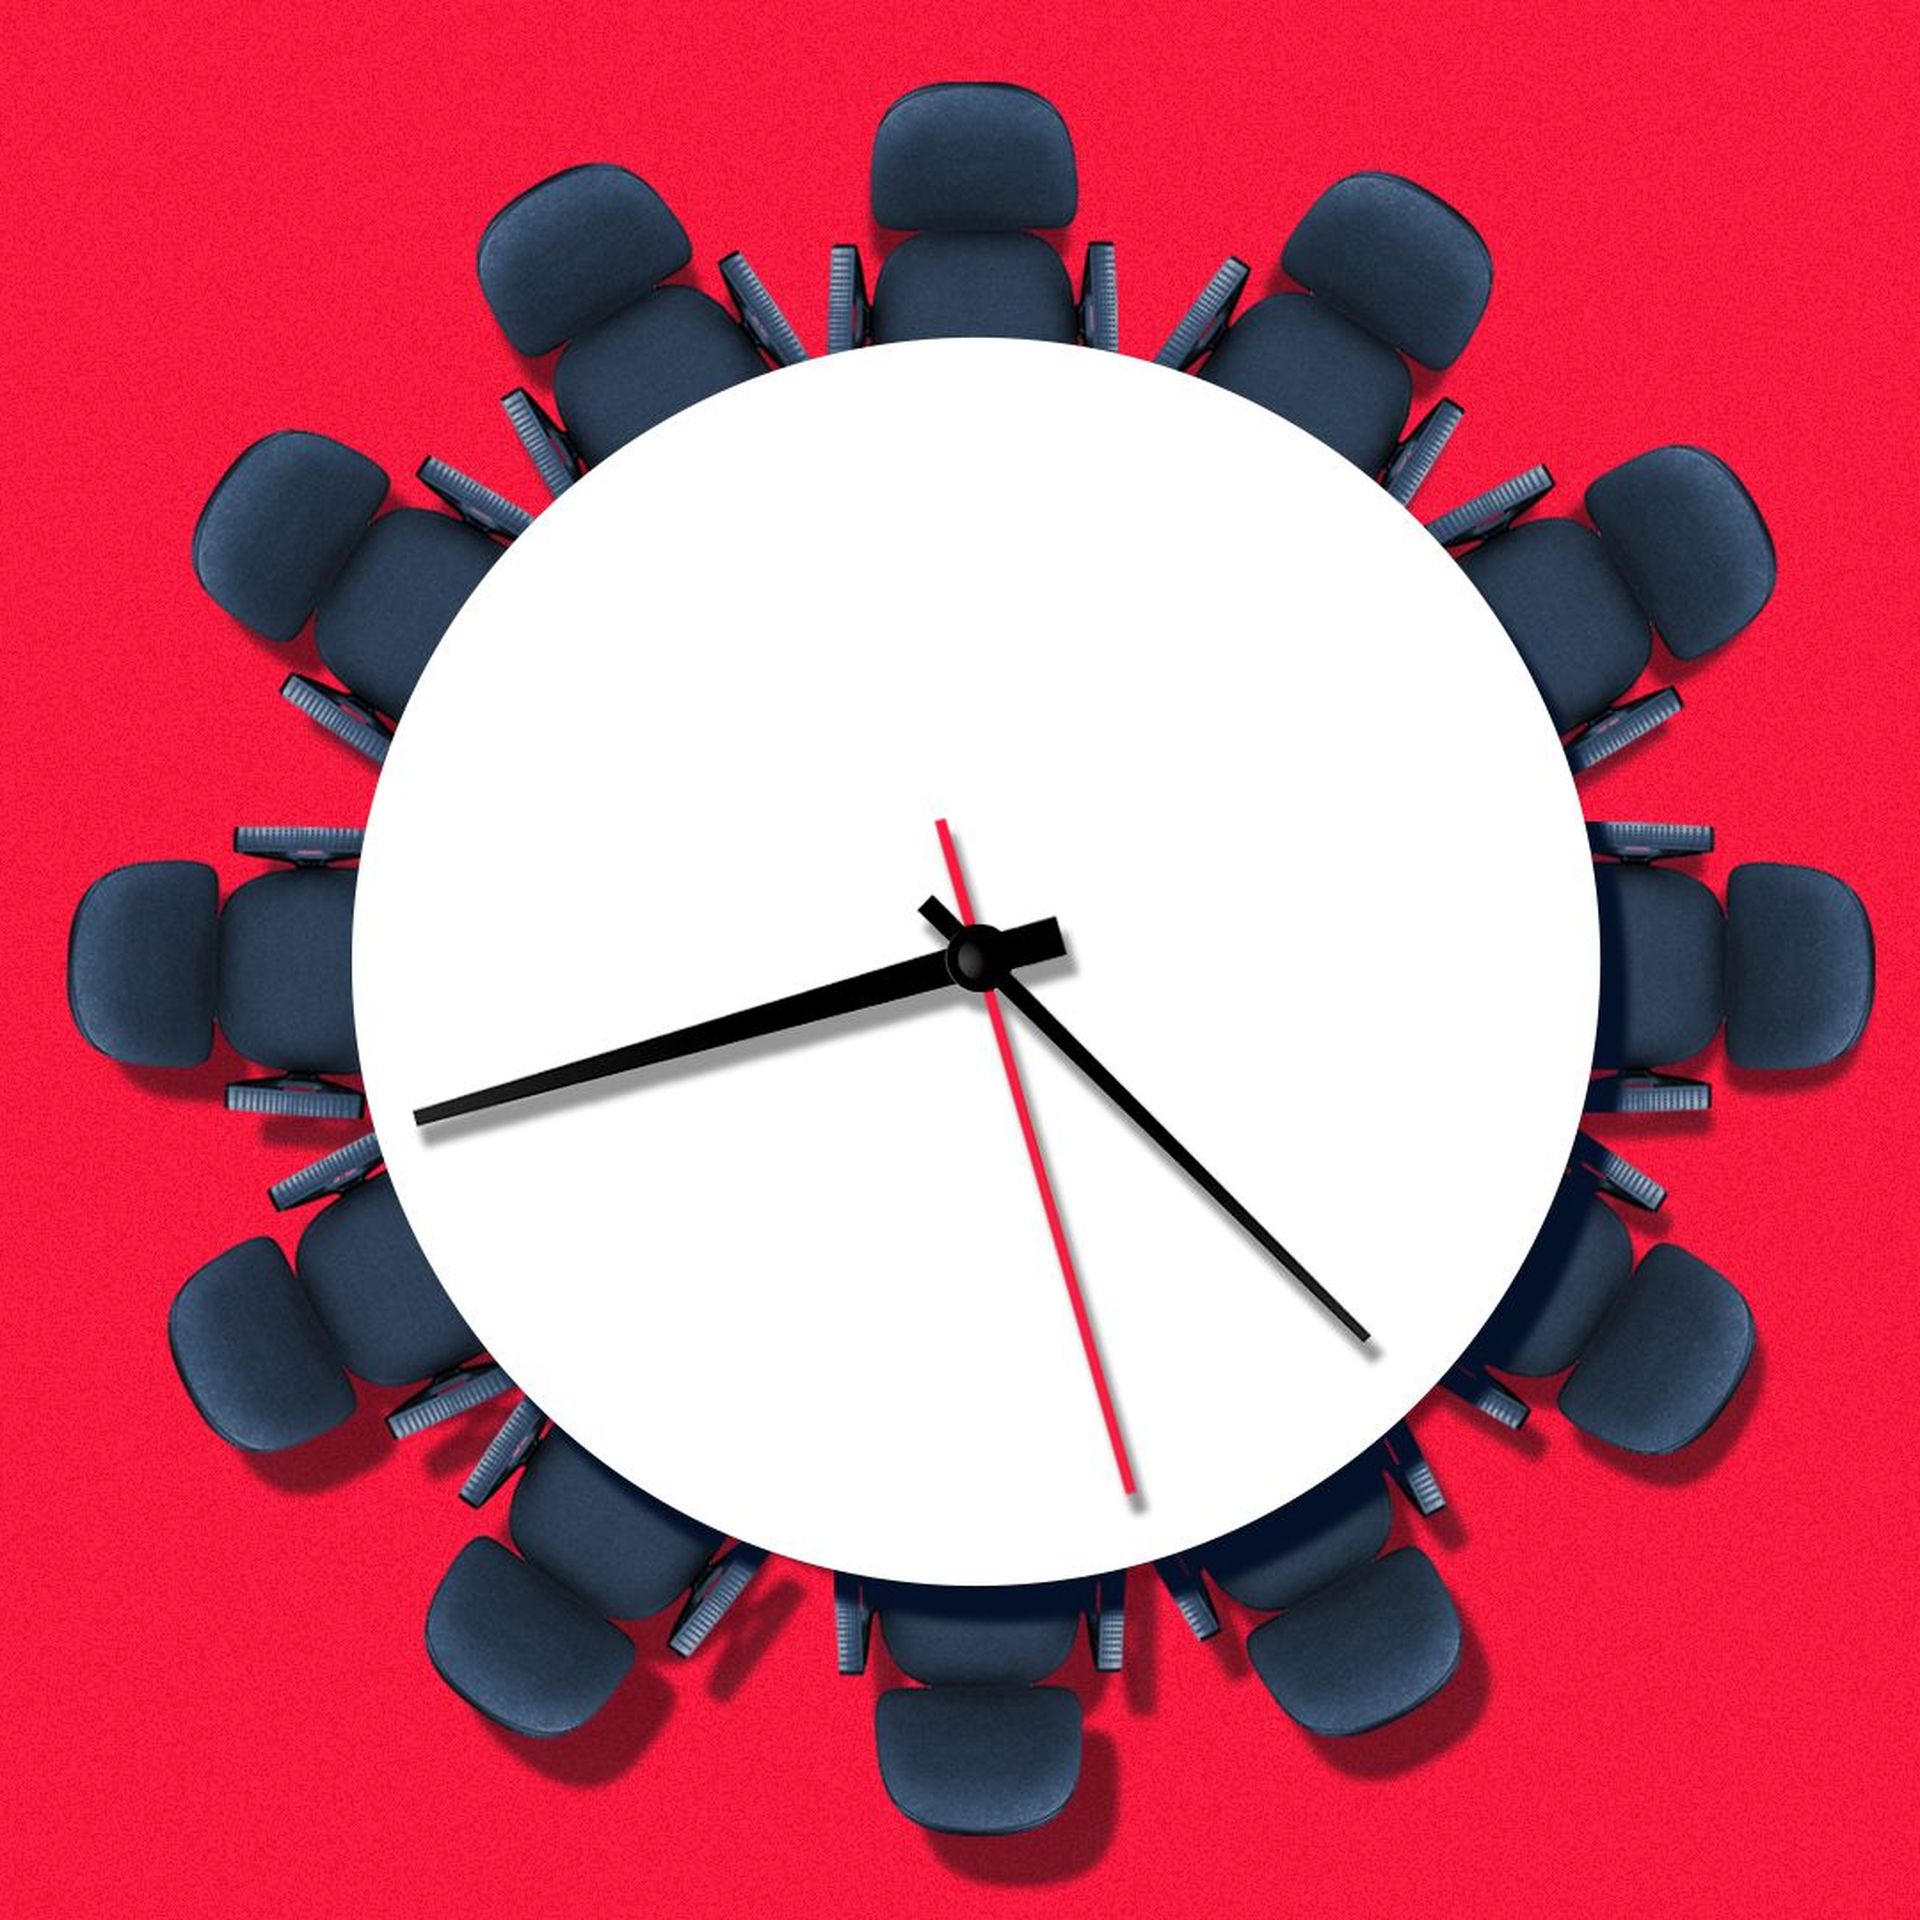 Illustration of a conference table surrounded by empty chairs with clock hands in the center